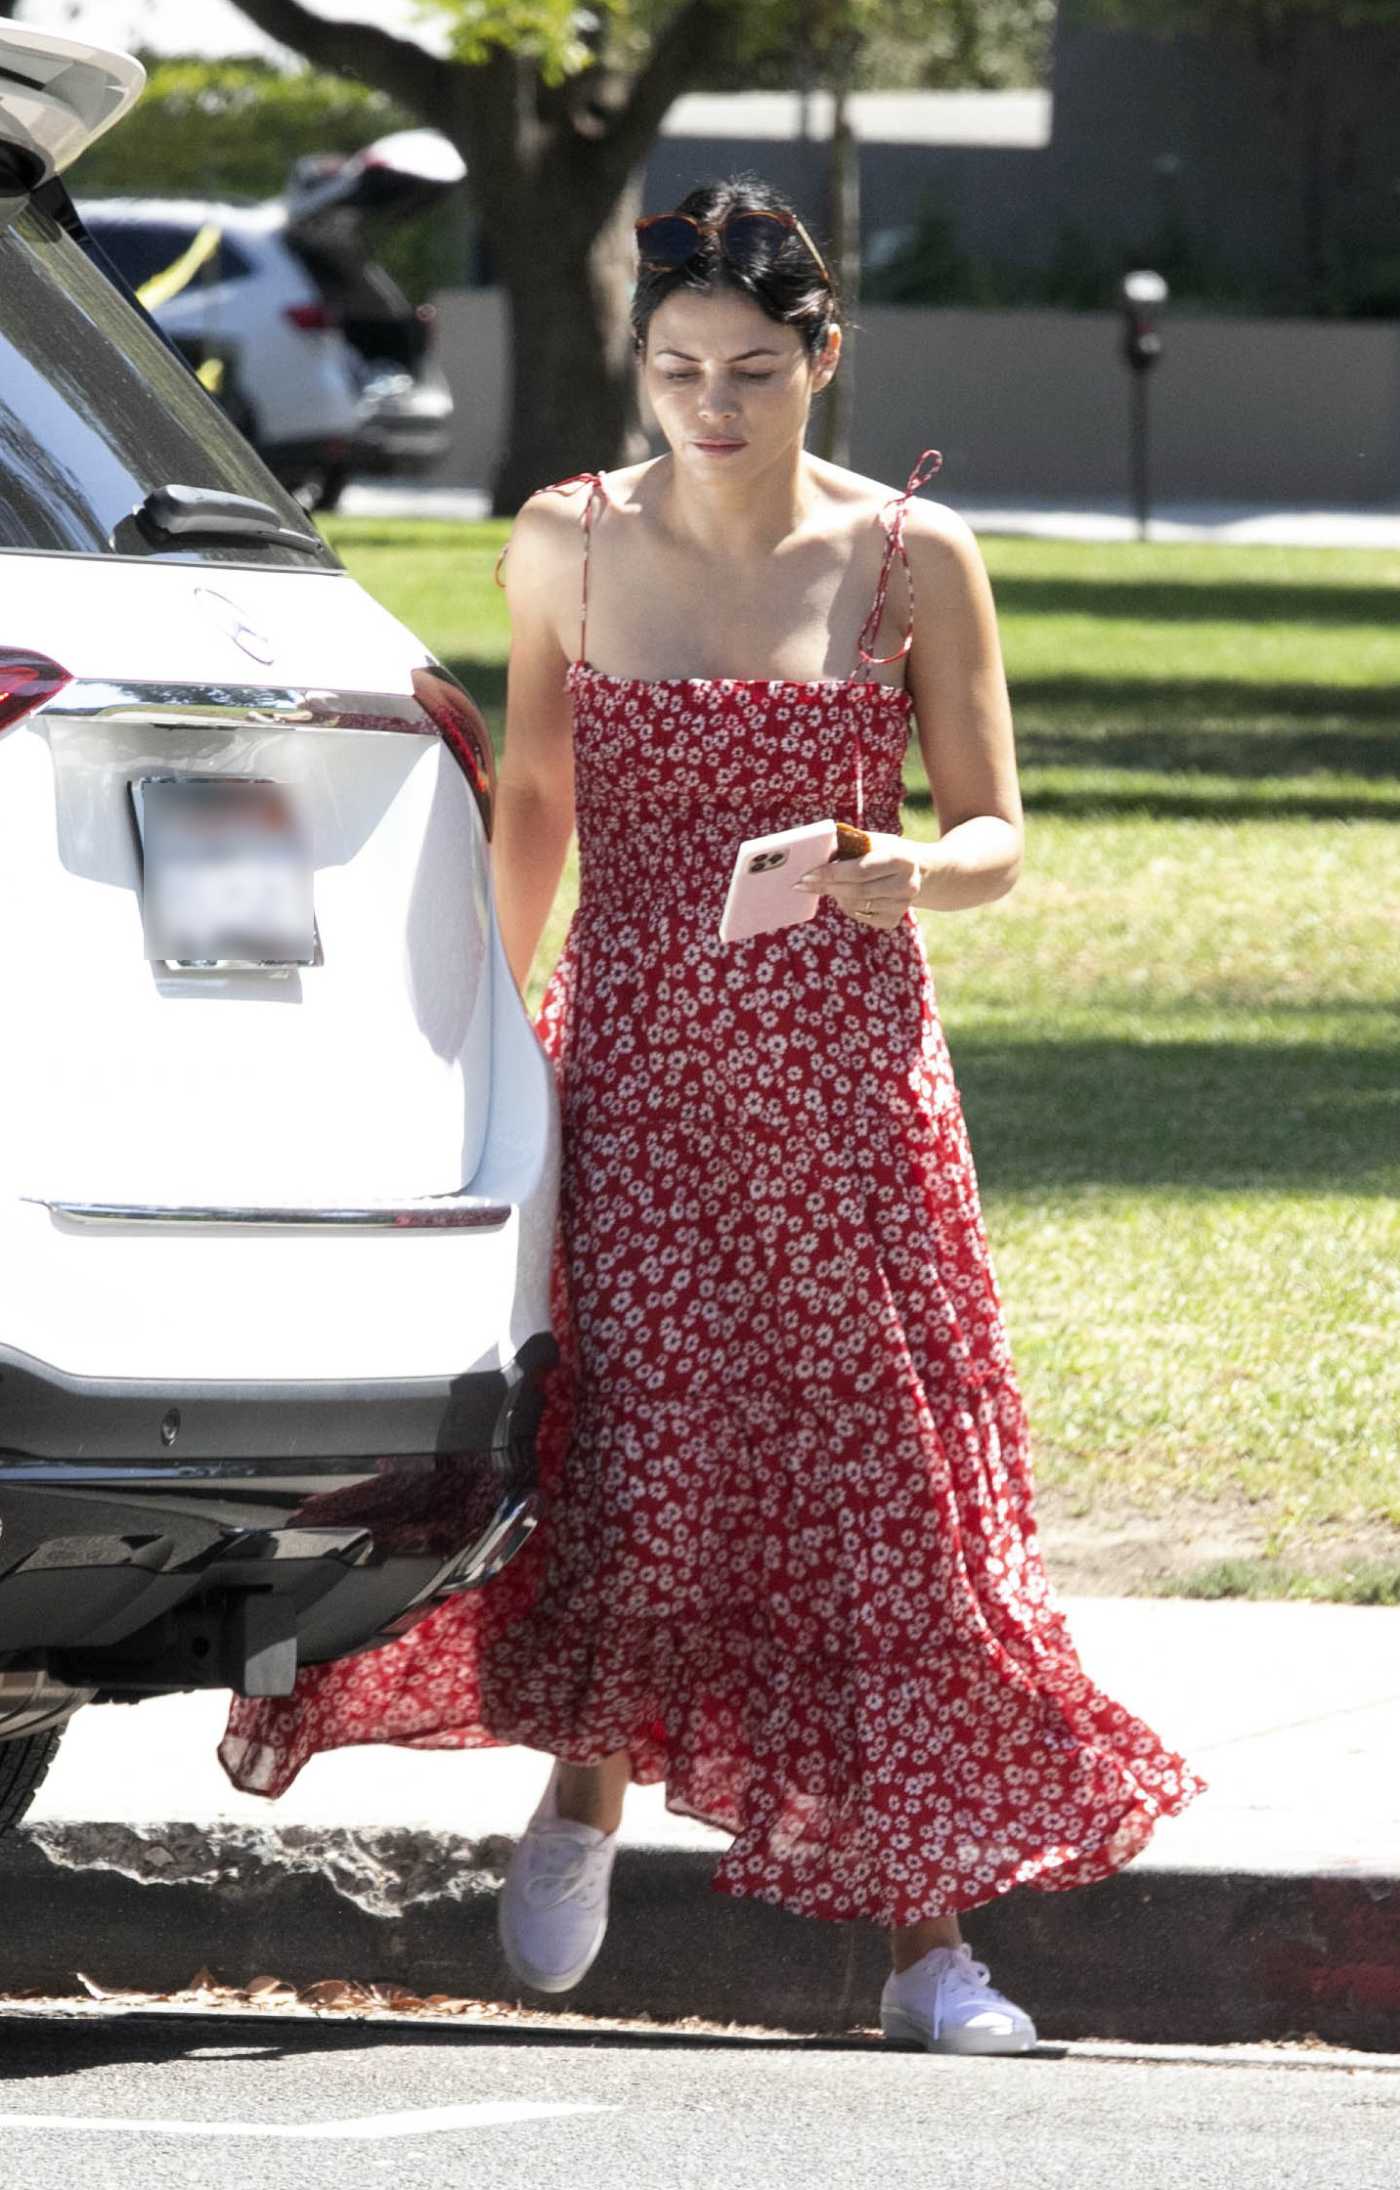 Jenna Dewan in a Red Floral Dress Visits a Park in Los Angeles 08/18/2022